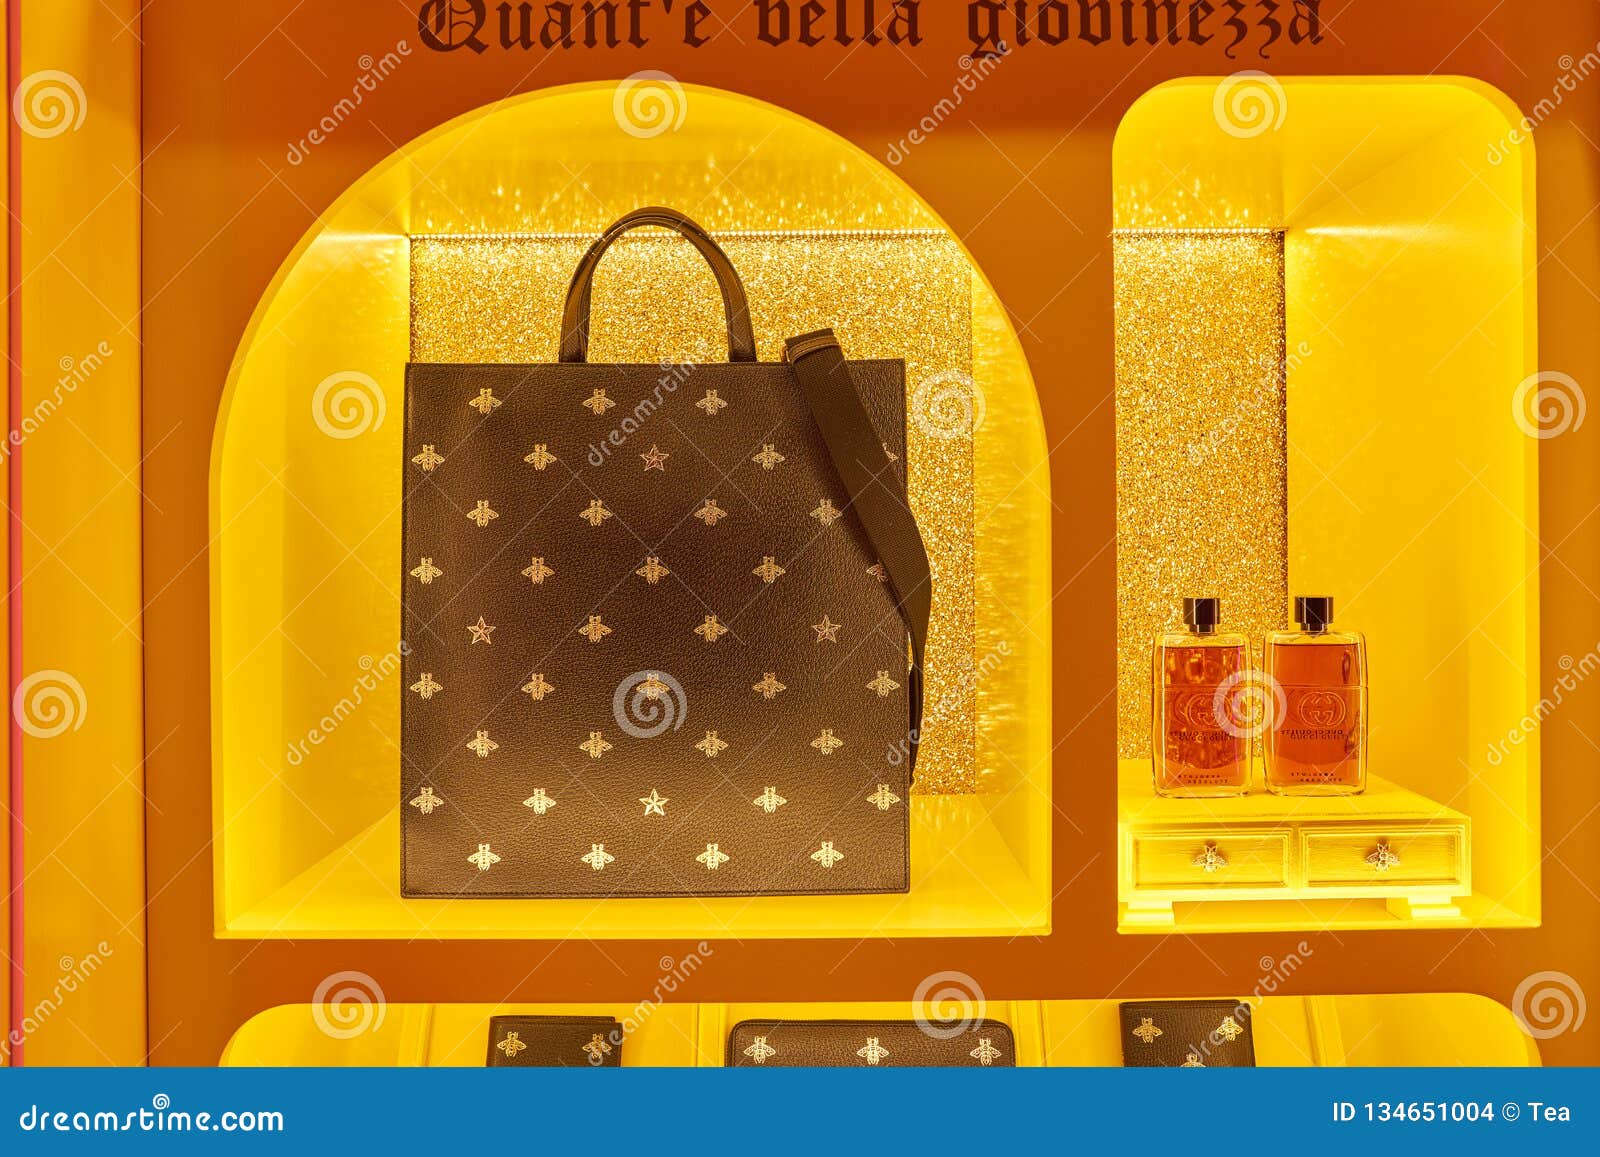 Gucci editorial stock image. Image of retail, expensive - 134651004